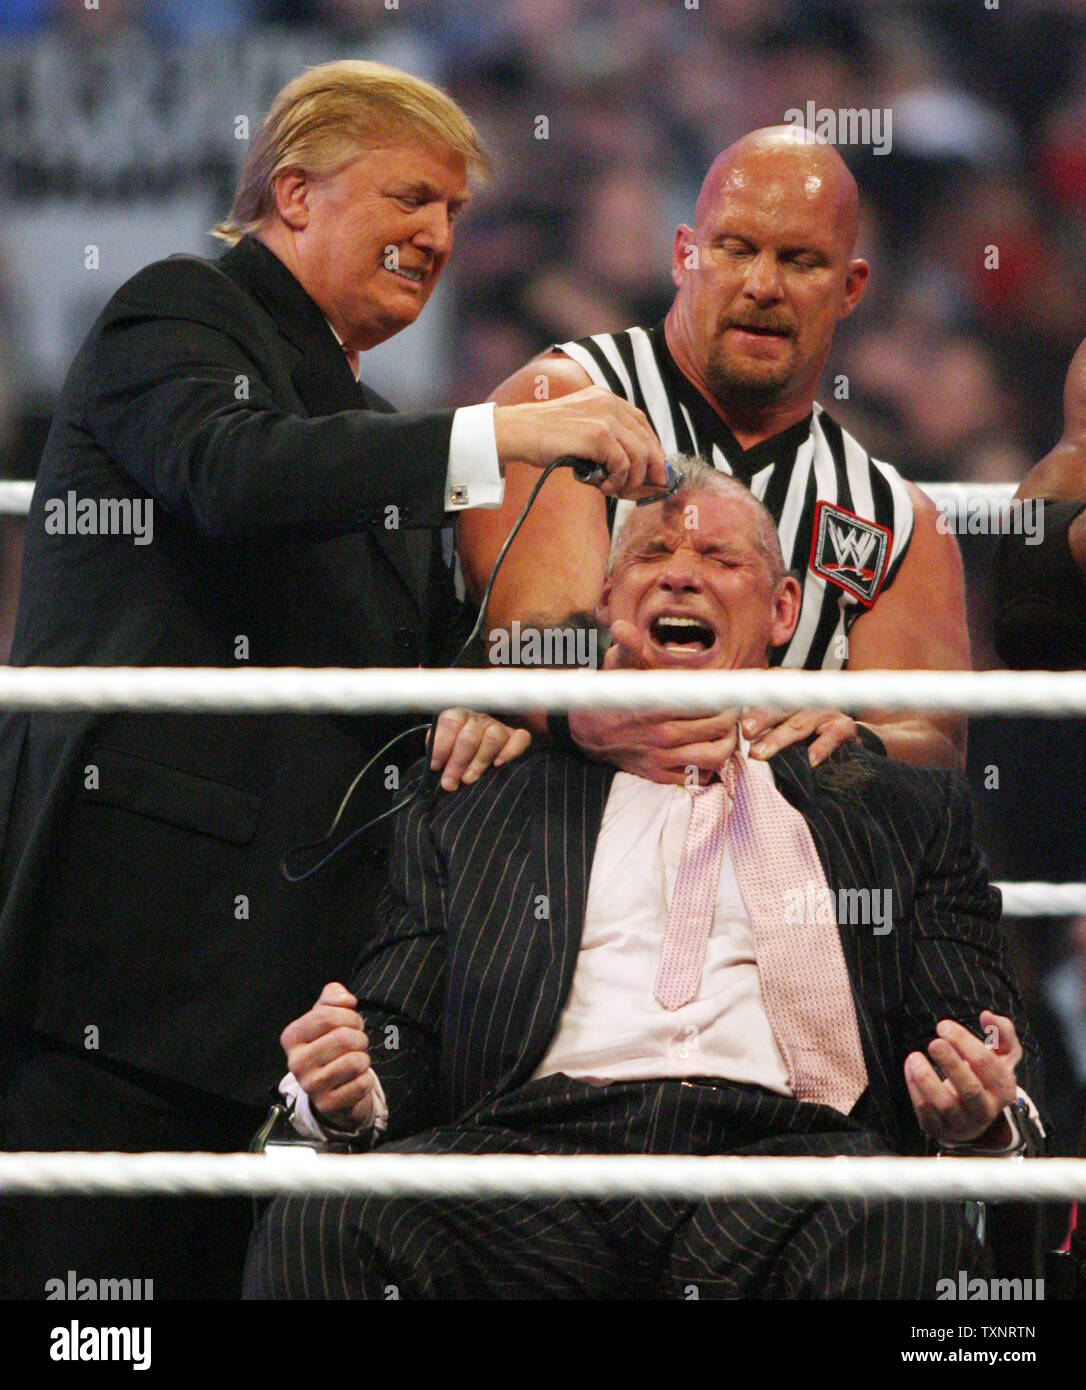 Donald Trump (L) shaves Vince McMahon's head while referee Stone Cold Steve Austin holds his head following the Battle of the Billionaires match during Wrestlemania 23 at Ford Field in Detroit on April 1, 2007.  Trumps wrestler, Bobby Lashley, defeated McMahon's wrestler Umaga.  (UPI Photos/Scott R. Galvin) Stock Photo